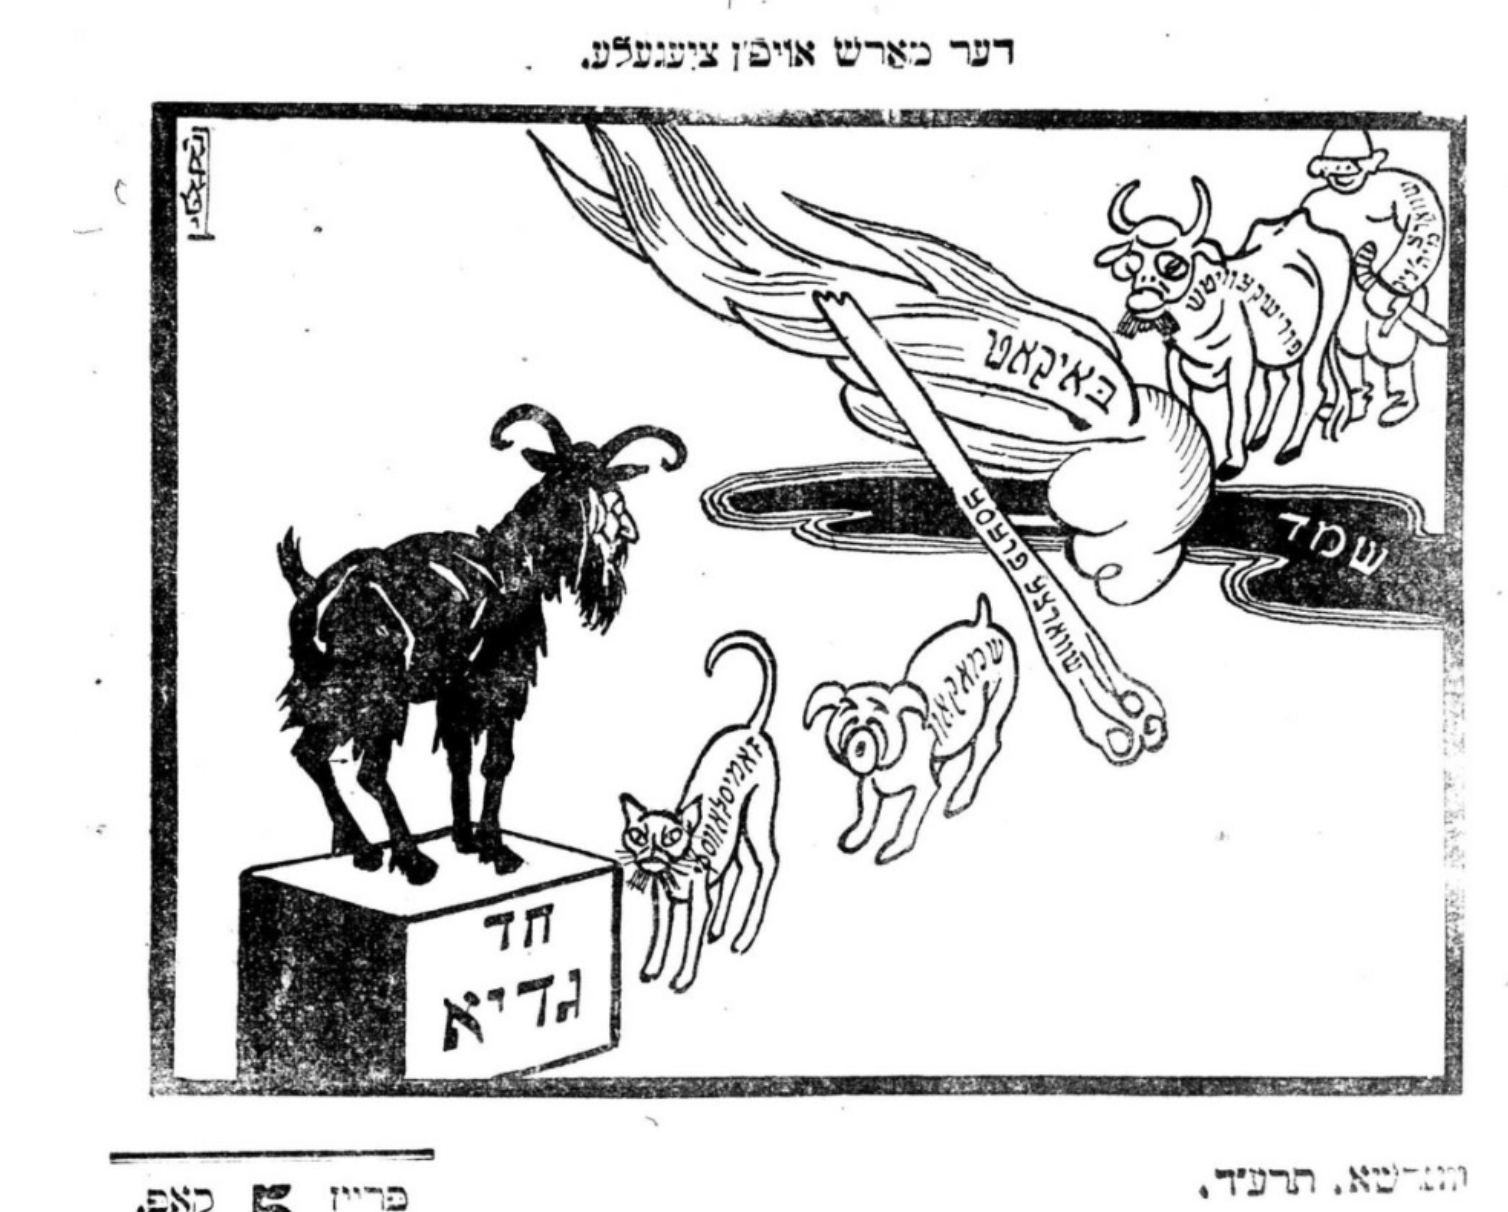 A bunch of animals and images lined up to the goat with things written on them, editorial cartoon style